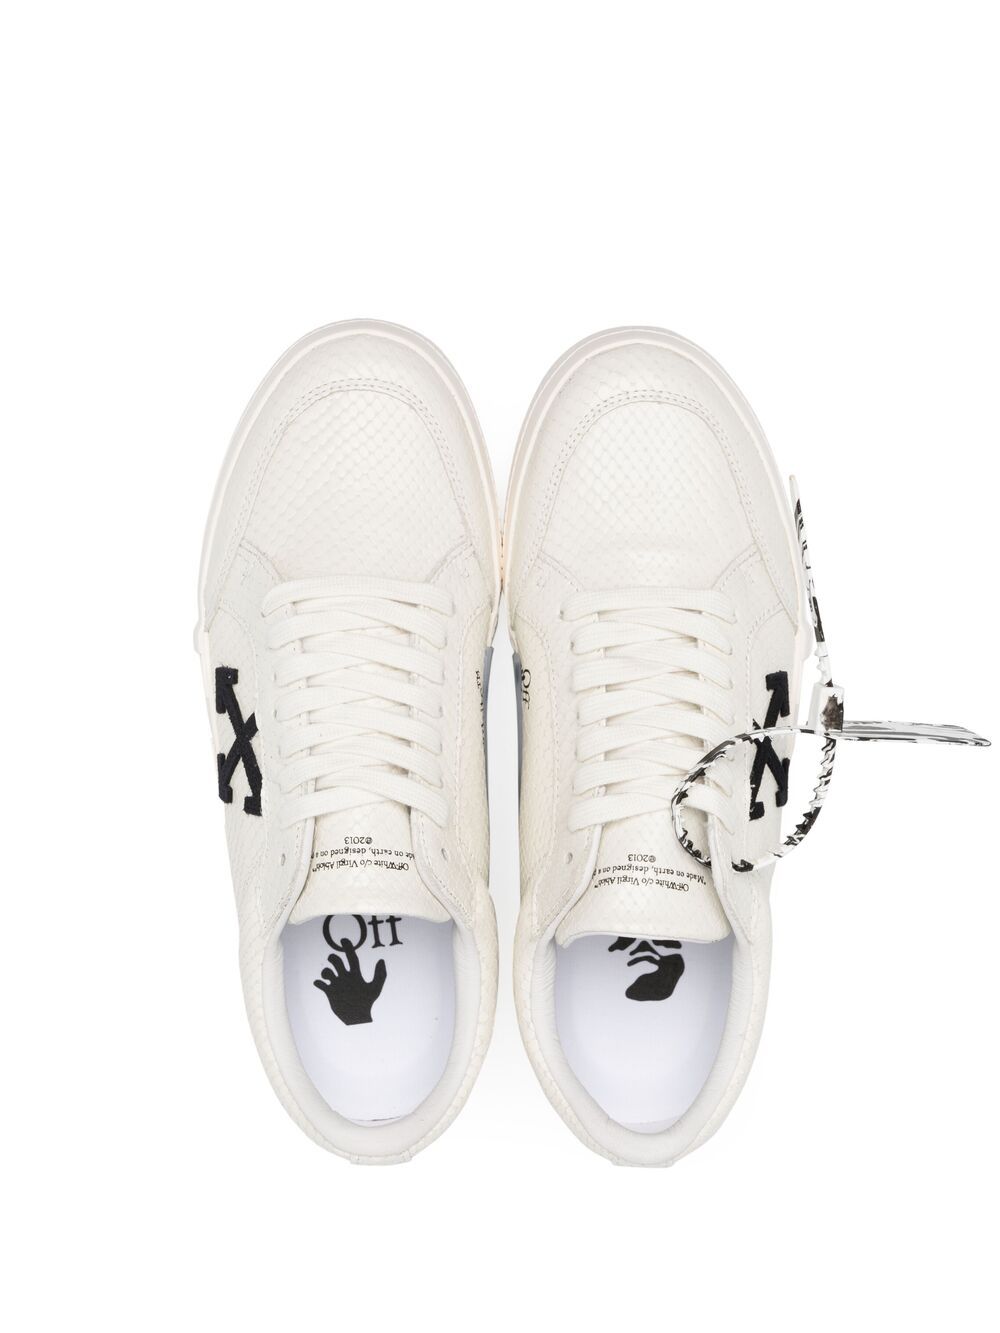 Off-White low-top Vulcanized Sneakers - Farfetch